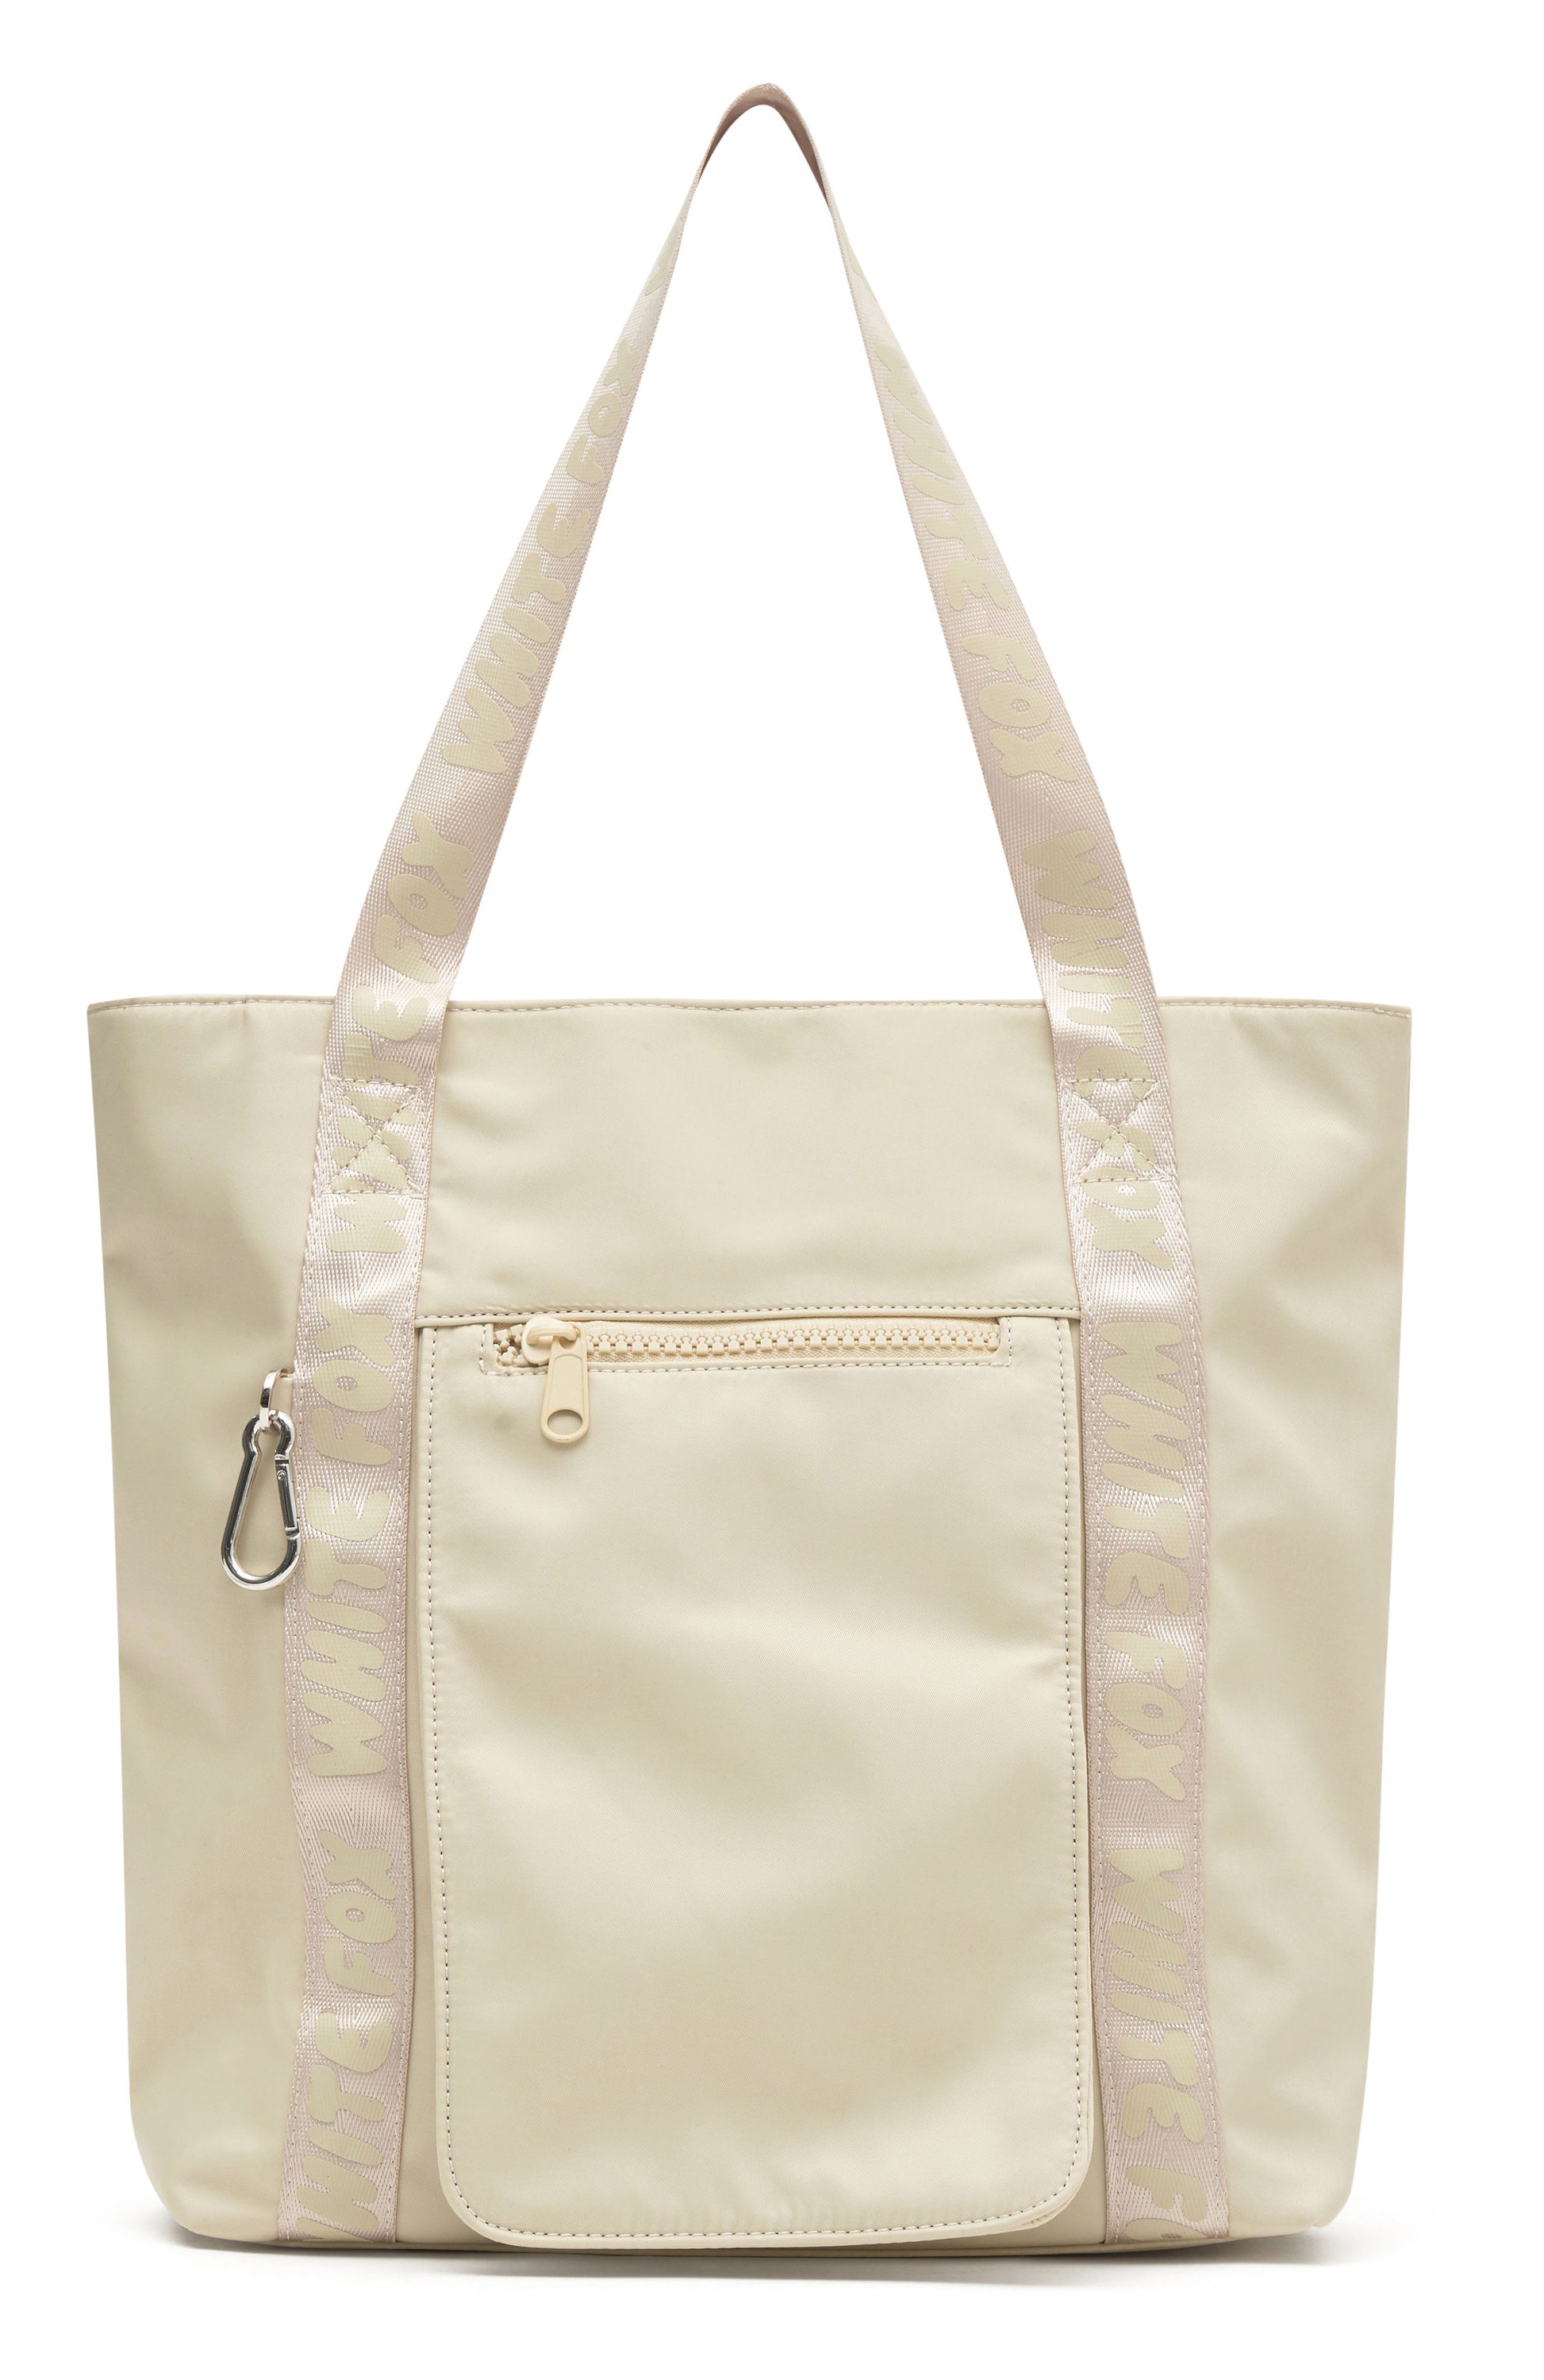 Jordan Tote Bag Beige - White Fox Boutique Accessories - One Size - Shop with Afterpay